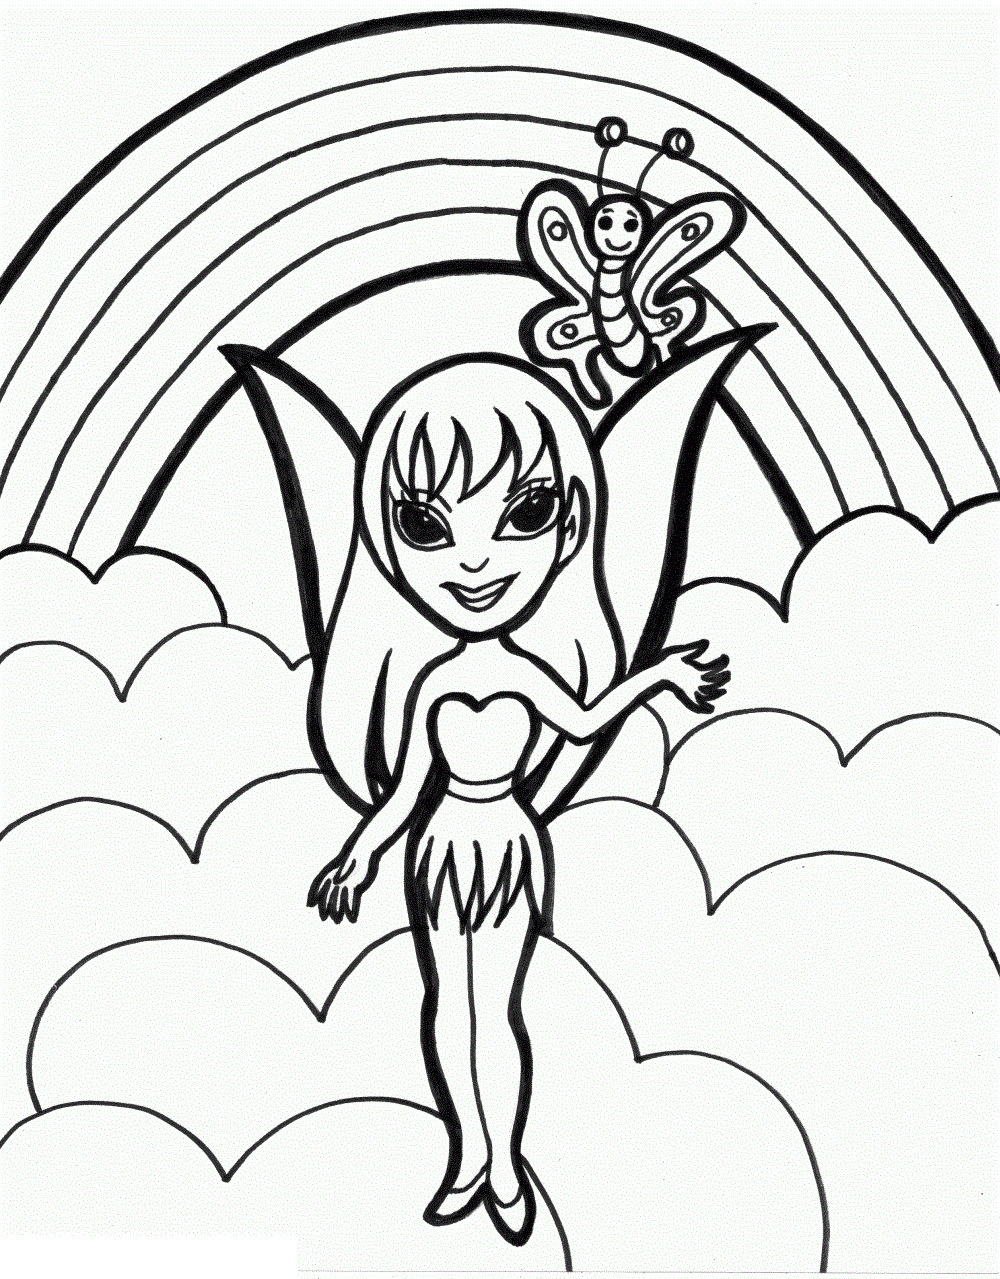 Rainbow Coloring Pages Free Printable
 Free Printable Rainbow Coloring Pages For Kids